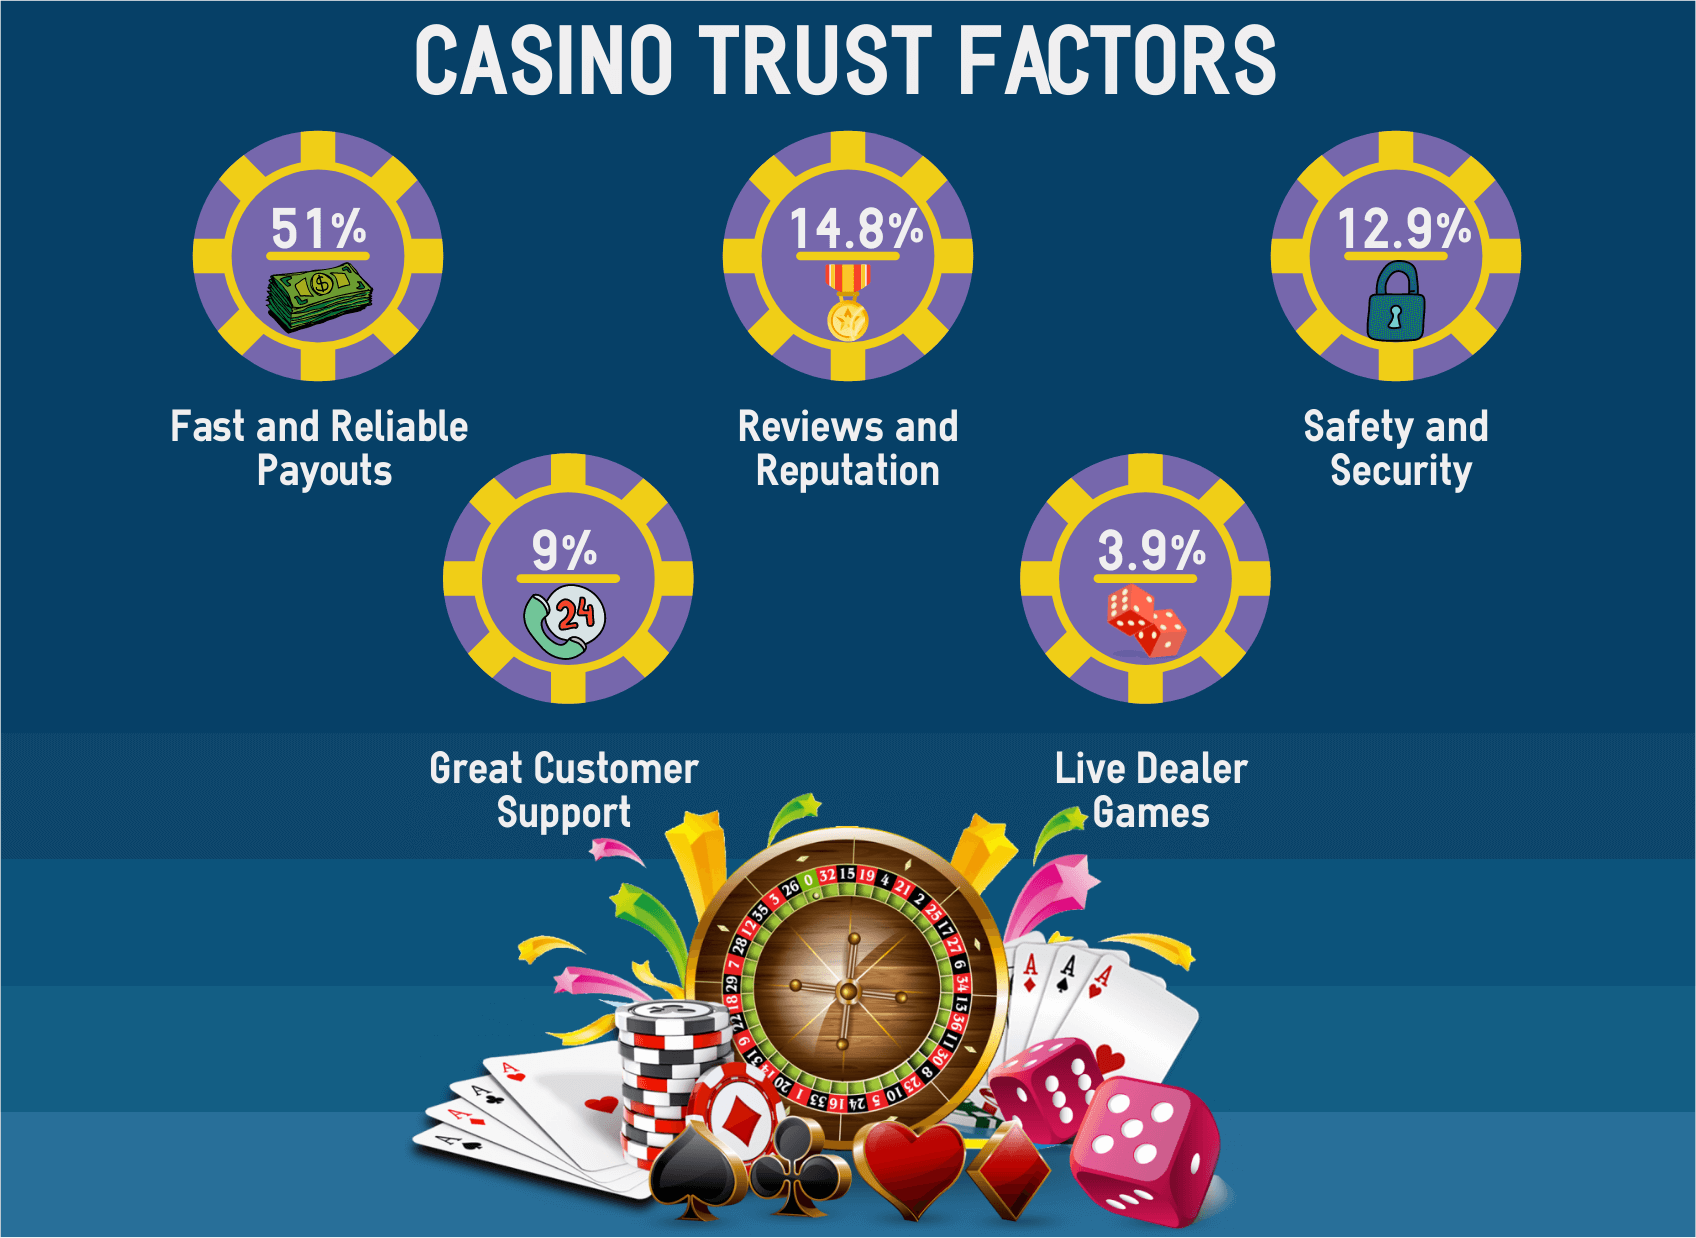 Are You Good At best online casinos? Here's A Quick Quiz To Find Out